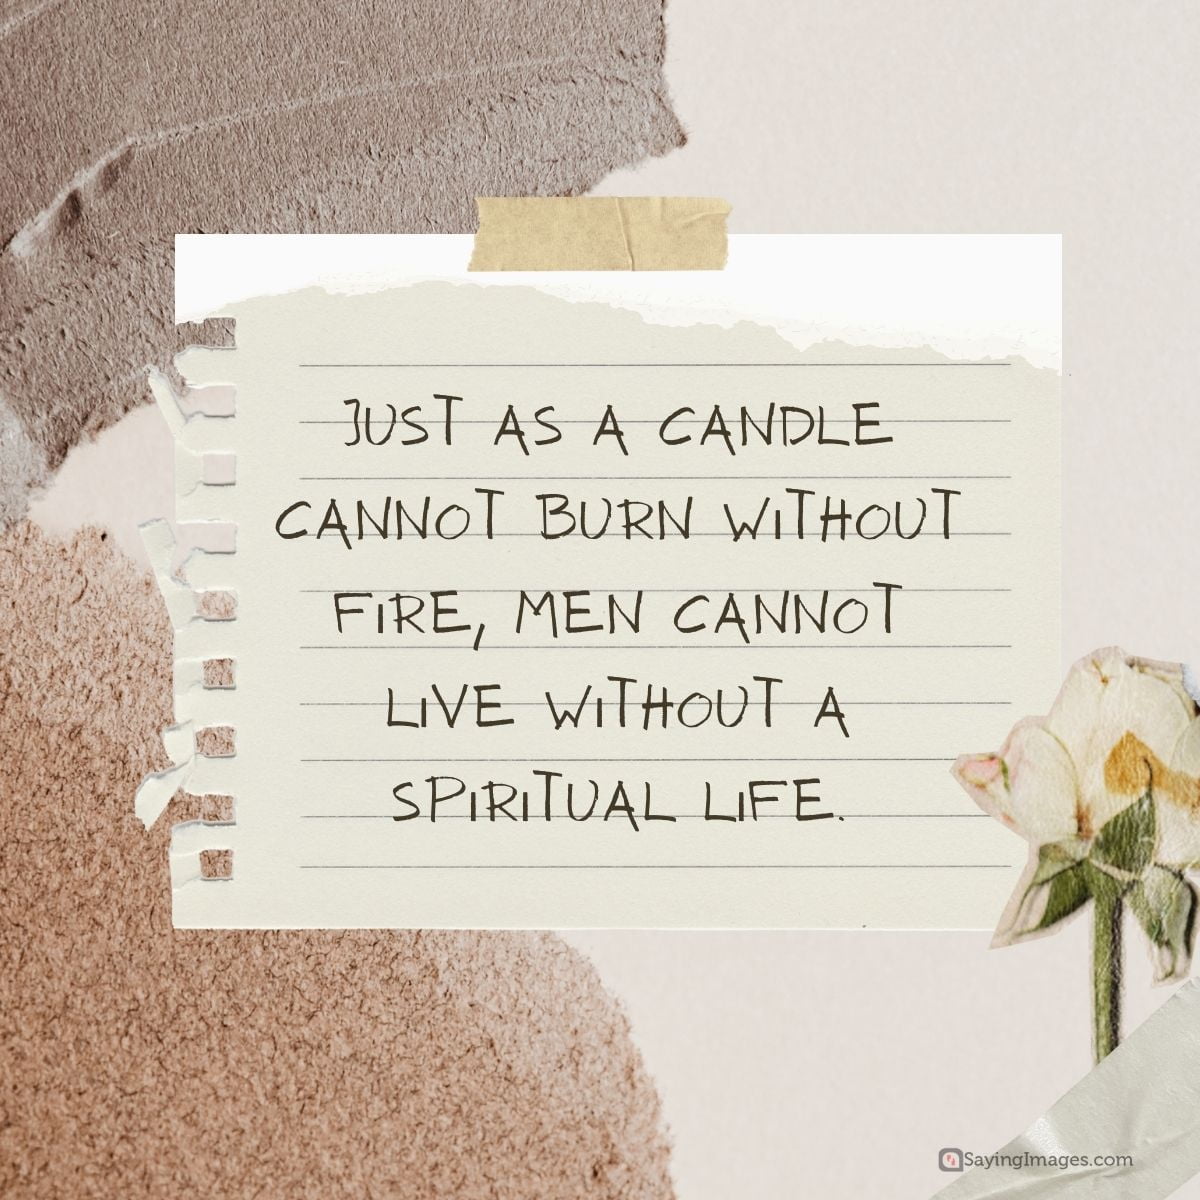 Just as a candle cannot burn without fire, men cannot live without a spiritual life